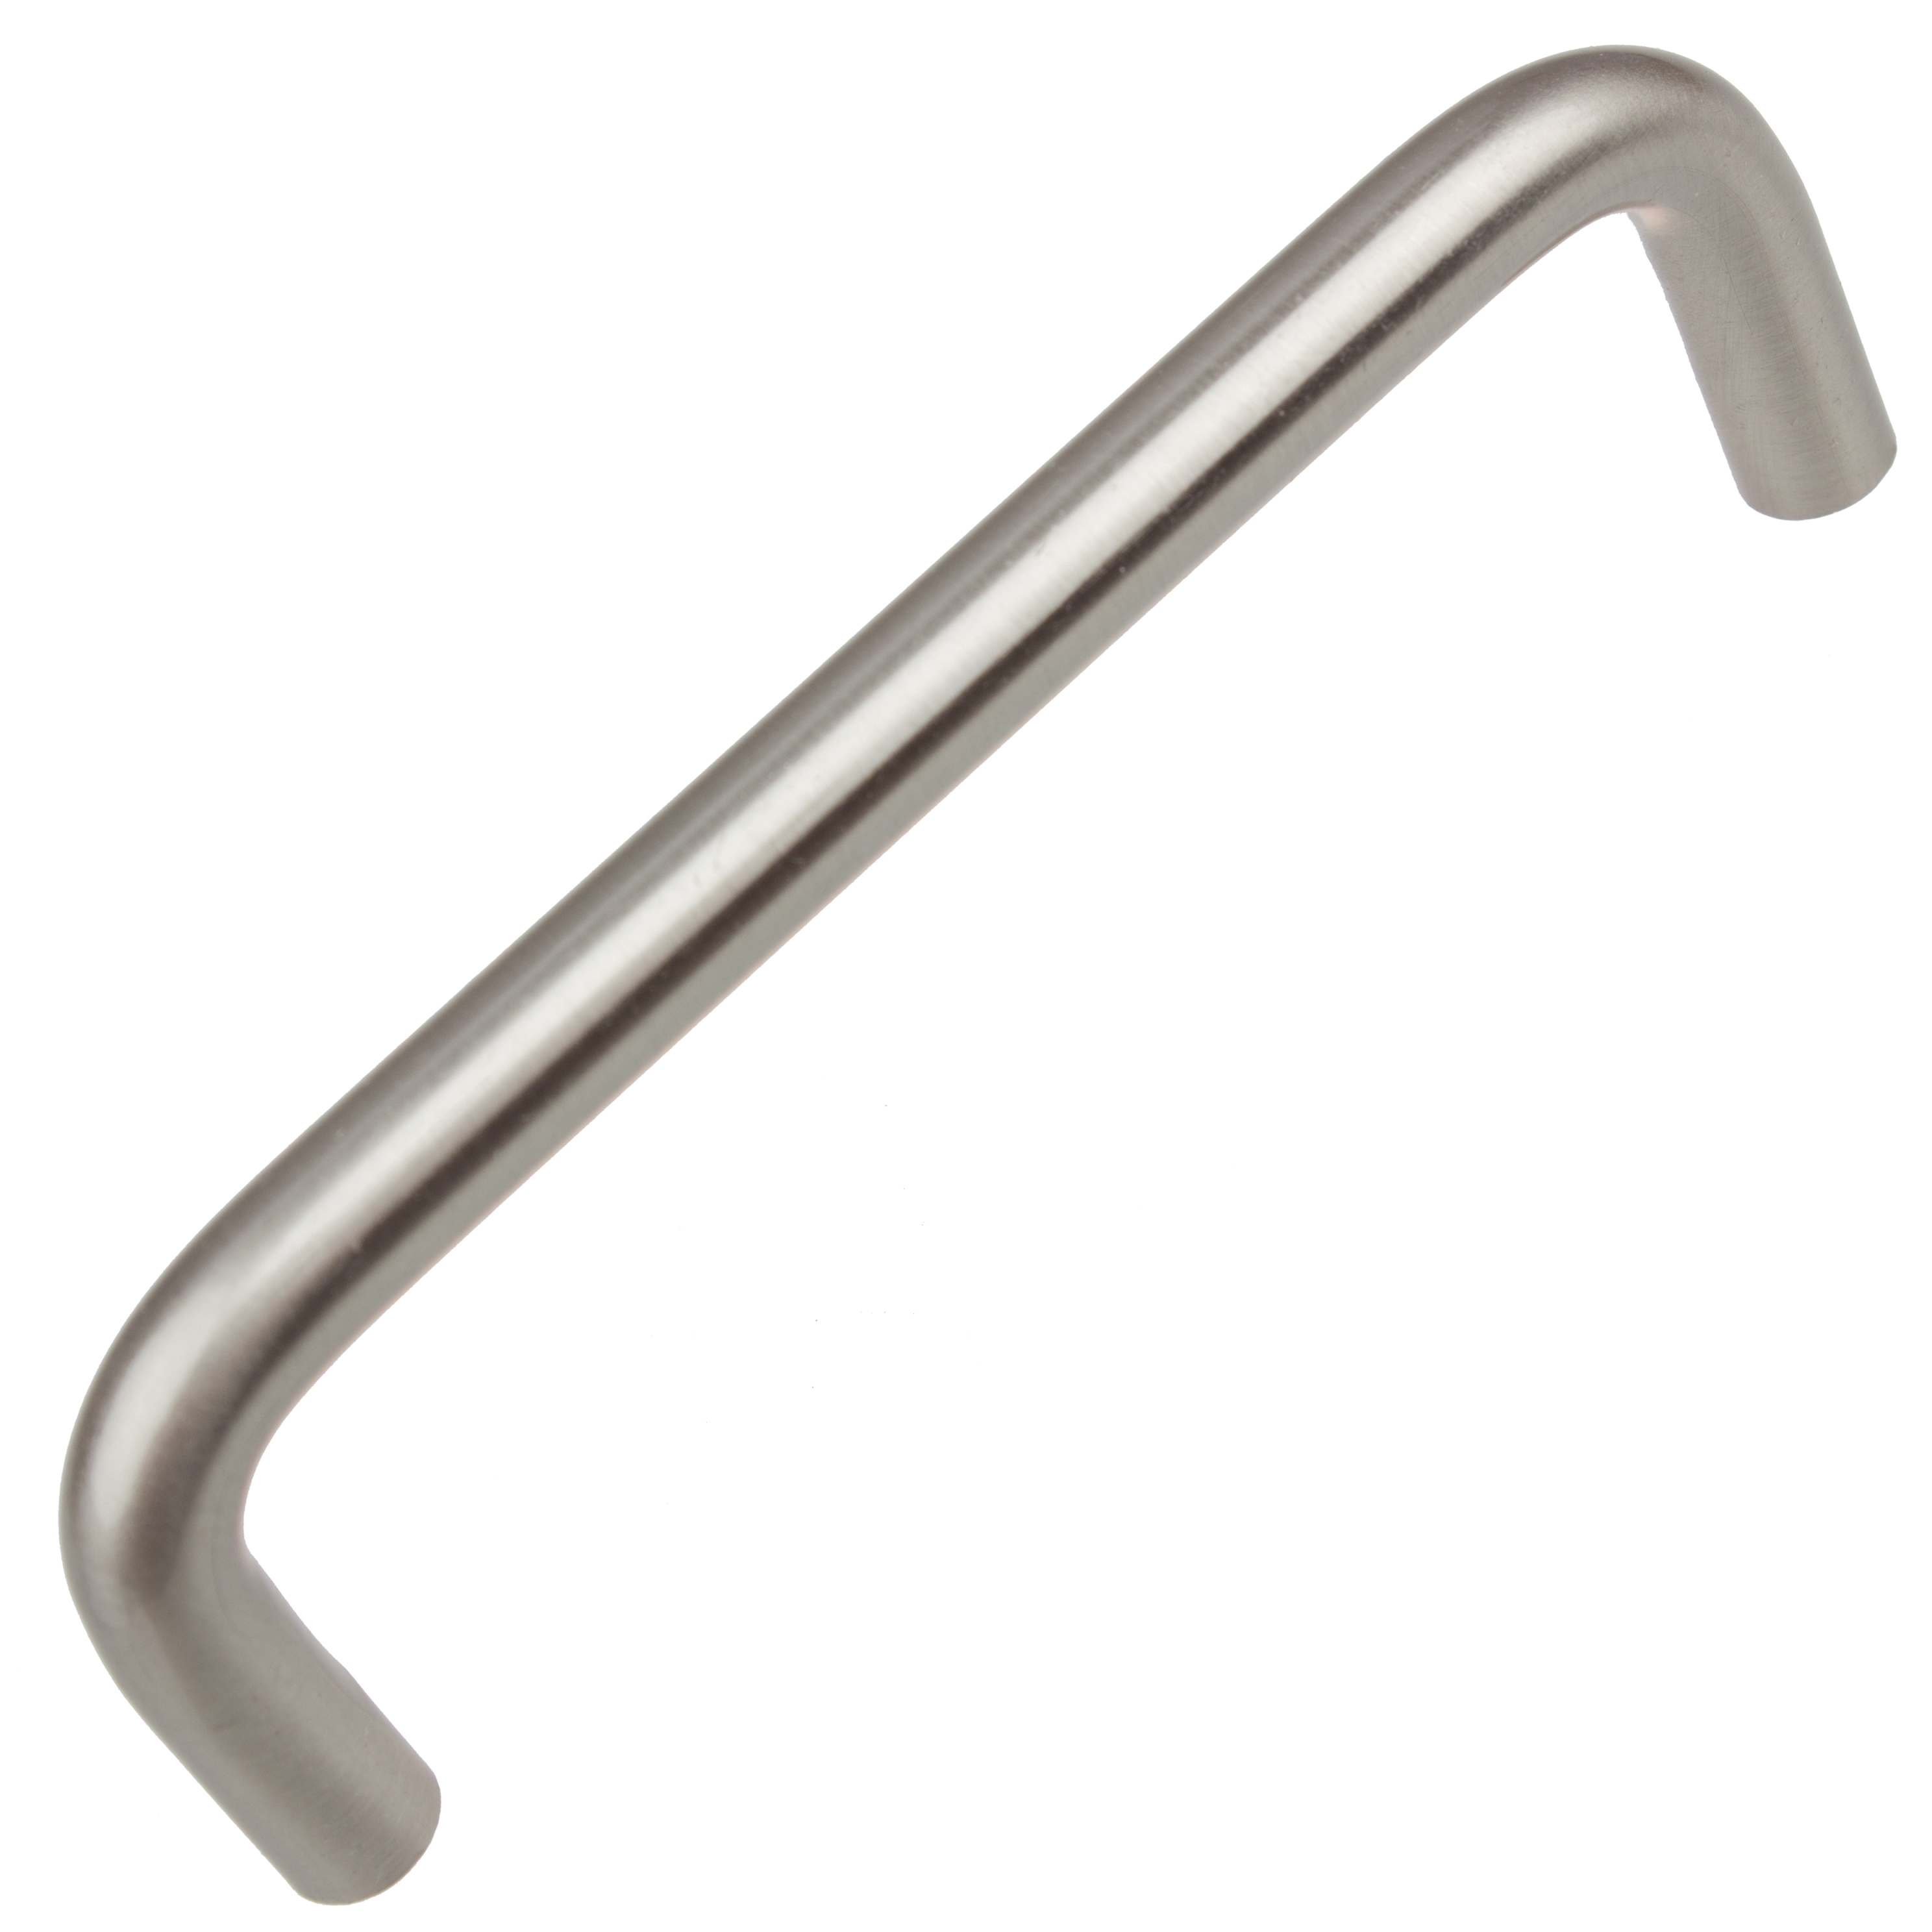 GlideRite 3-3/4 in. Center Solid Steel Wire Cabinet Pull, Stainless Steel finish, Pack of 10 - image 1 of 4